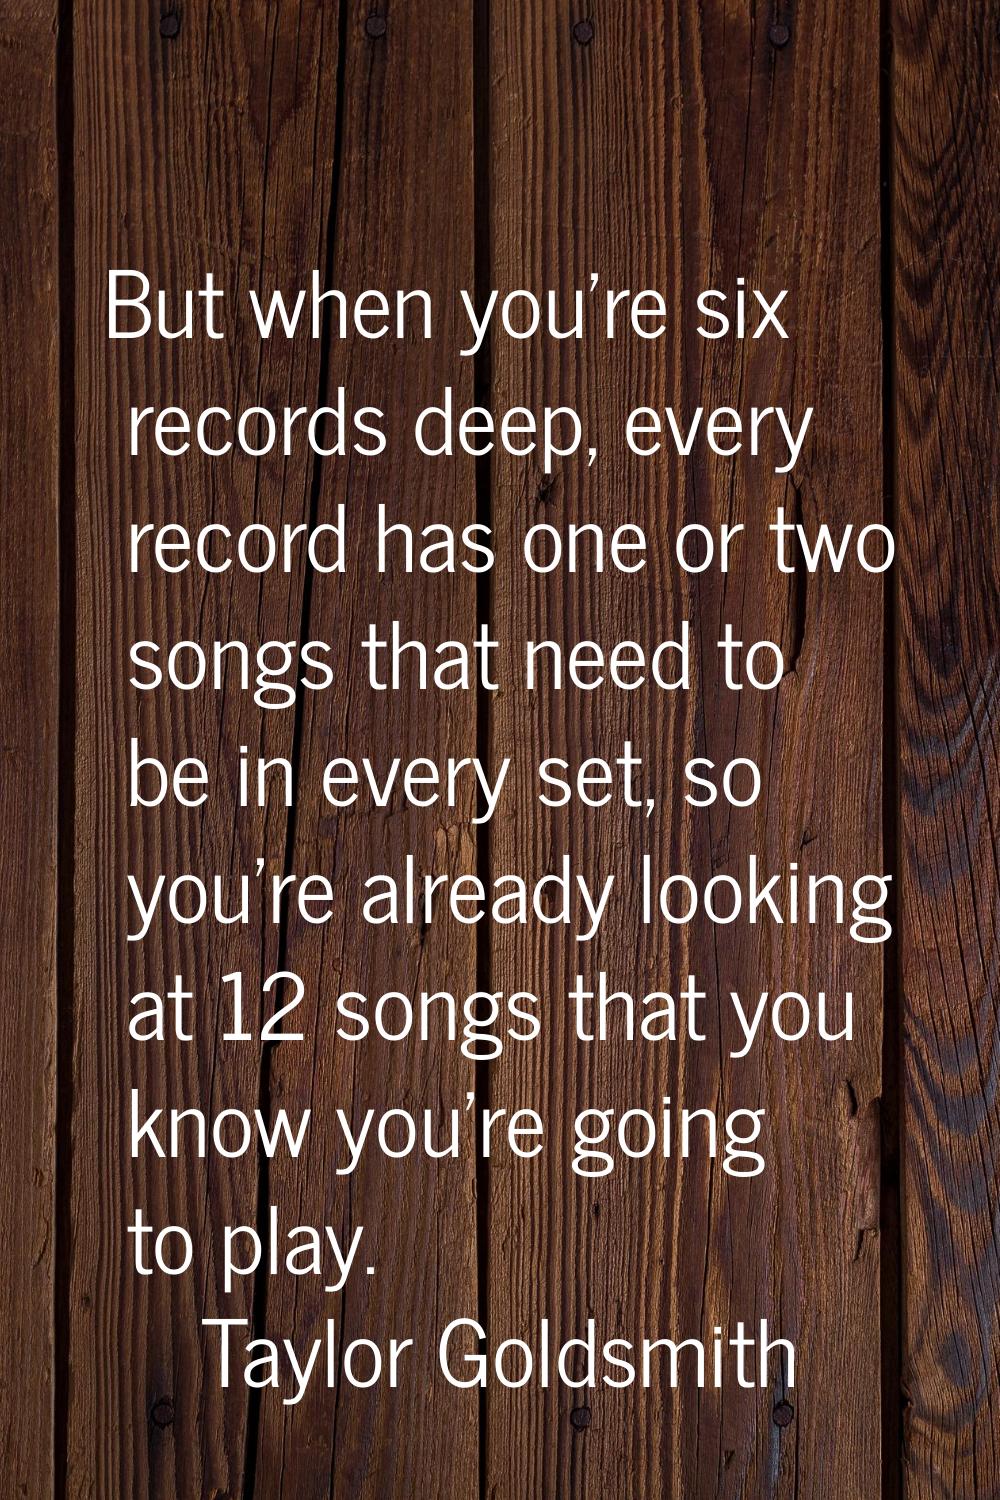 But when you're six records deep, every record has one or two songs that need to be in every set, s